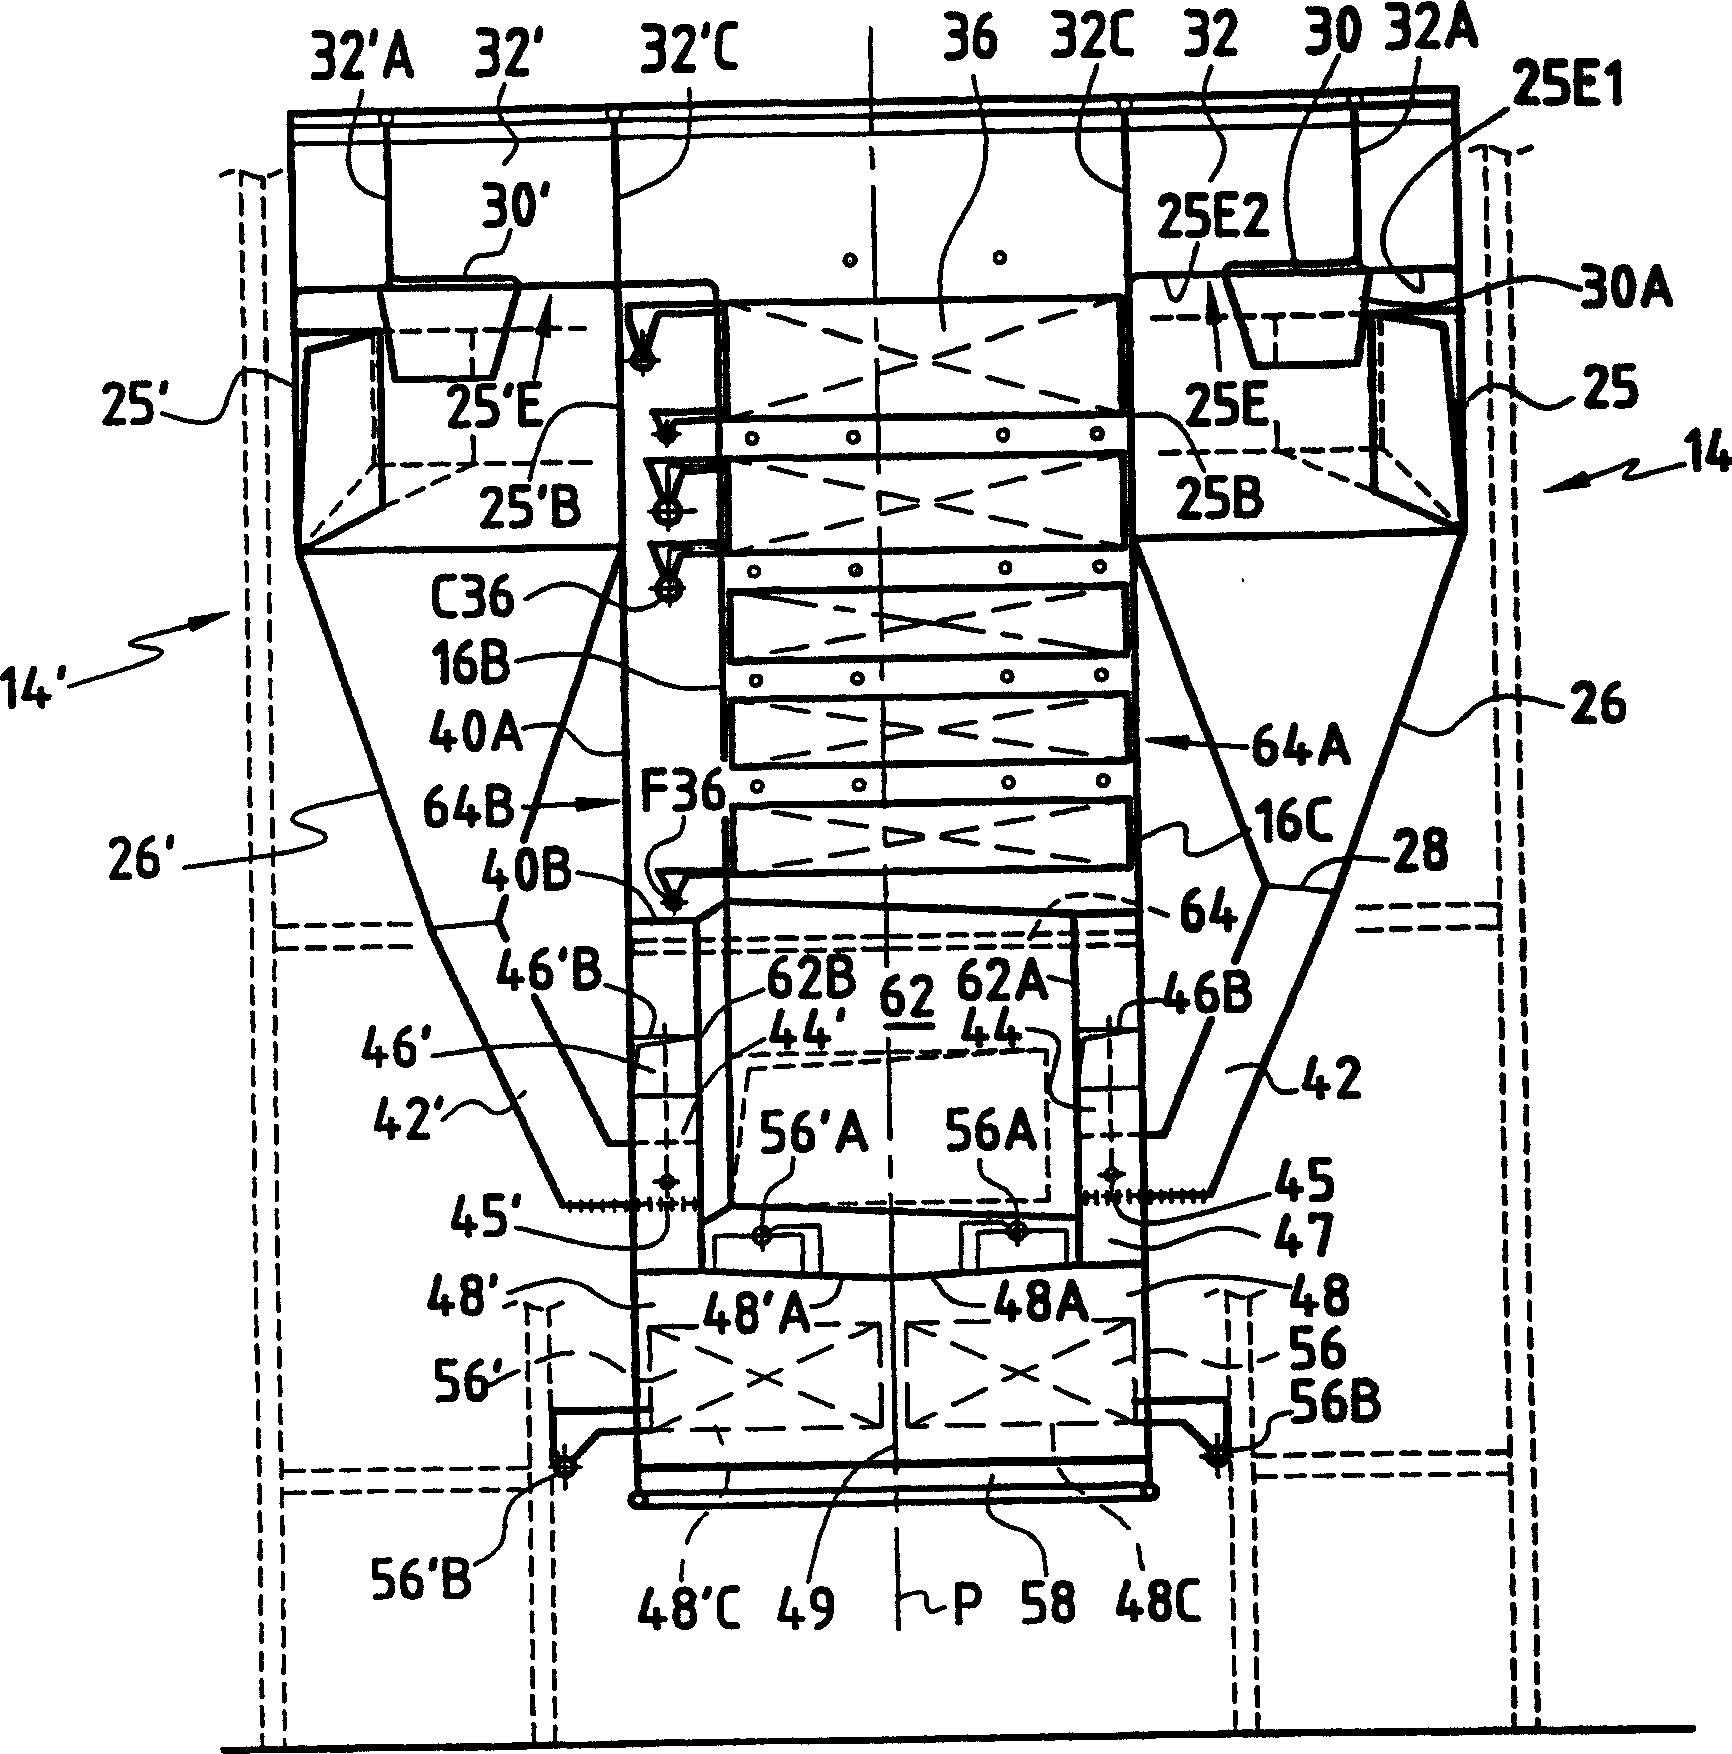 A circulating fluidized bed reactor device